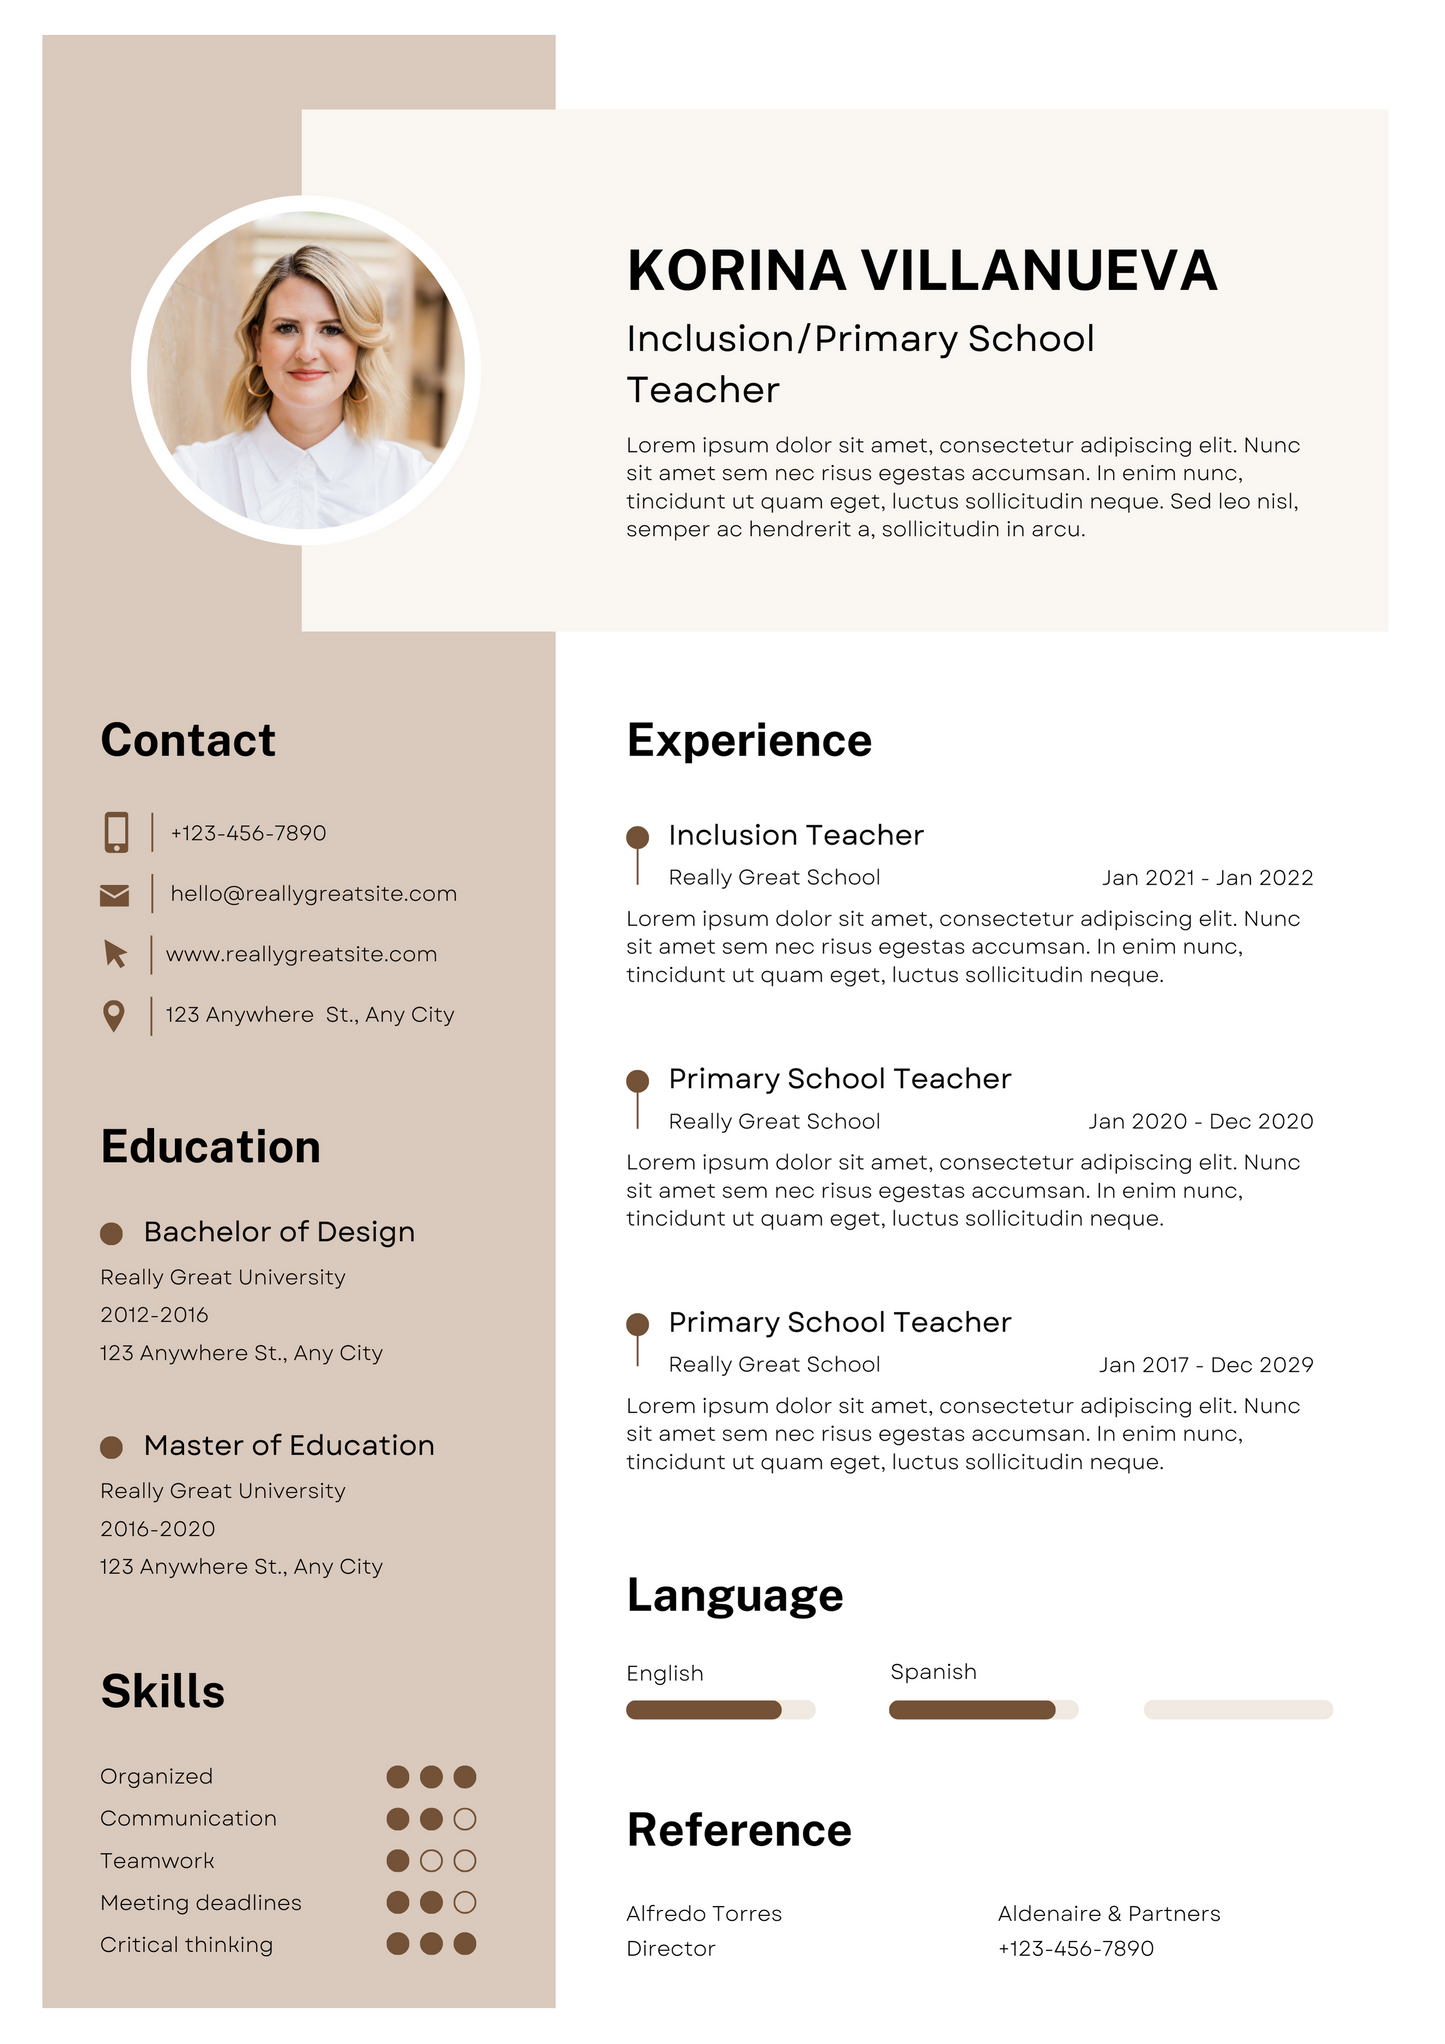 Resume Review and Update